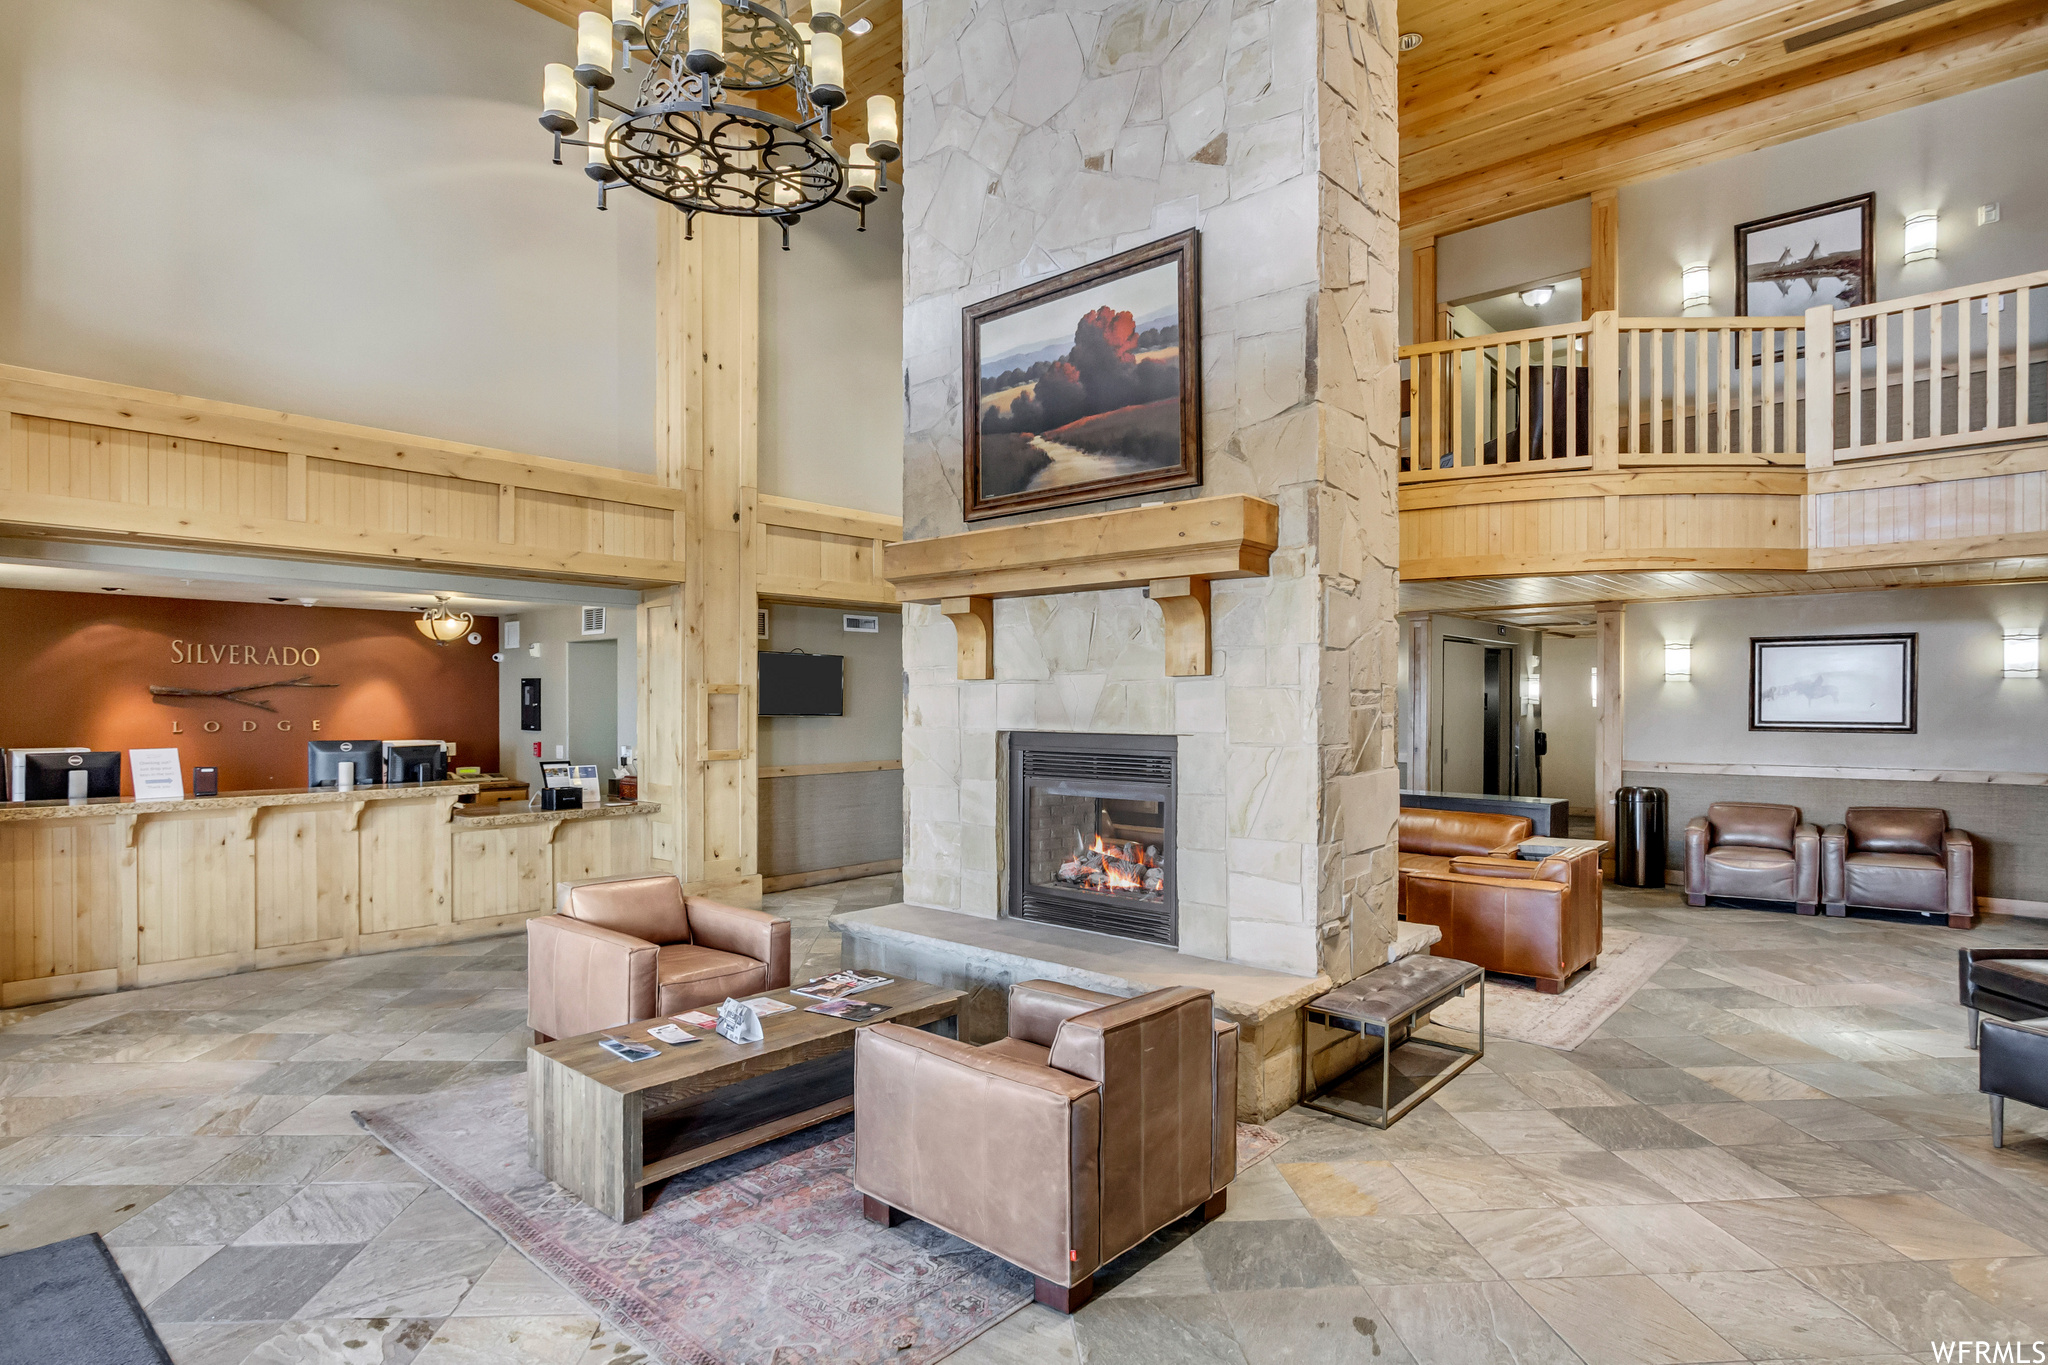 2653 CANYON RESORT #220, Park City, Utah 84098, 2 Bedrooms Bedrooms, 10 Rooms Rooms,2 BathroomsBathrooms,Residential,For sale,CANYON RESORT,1851484